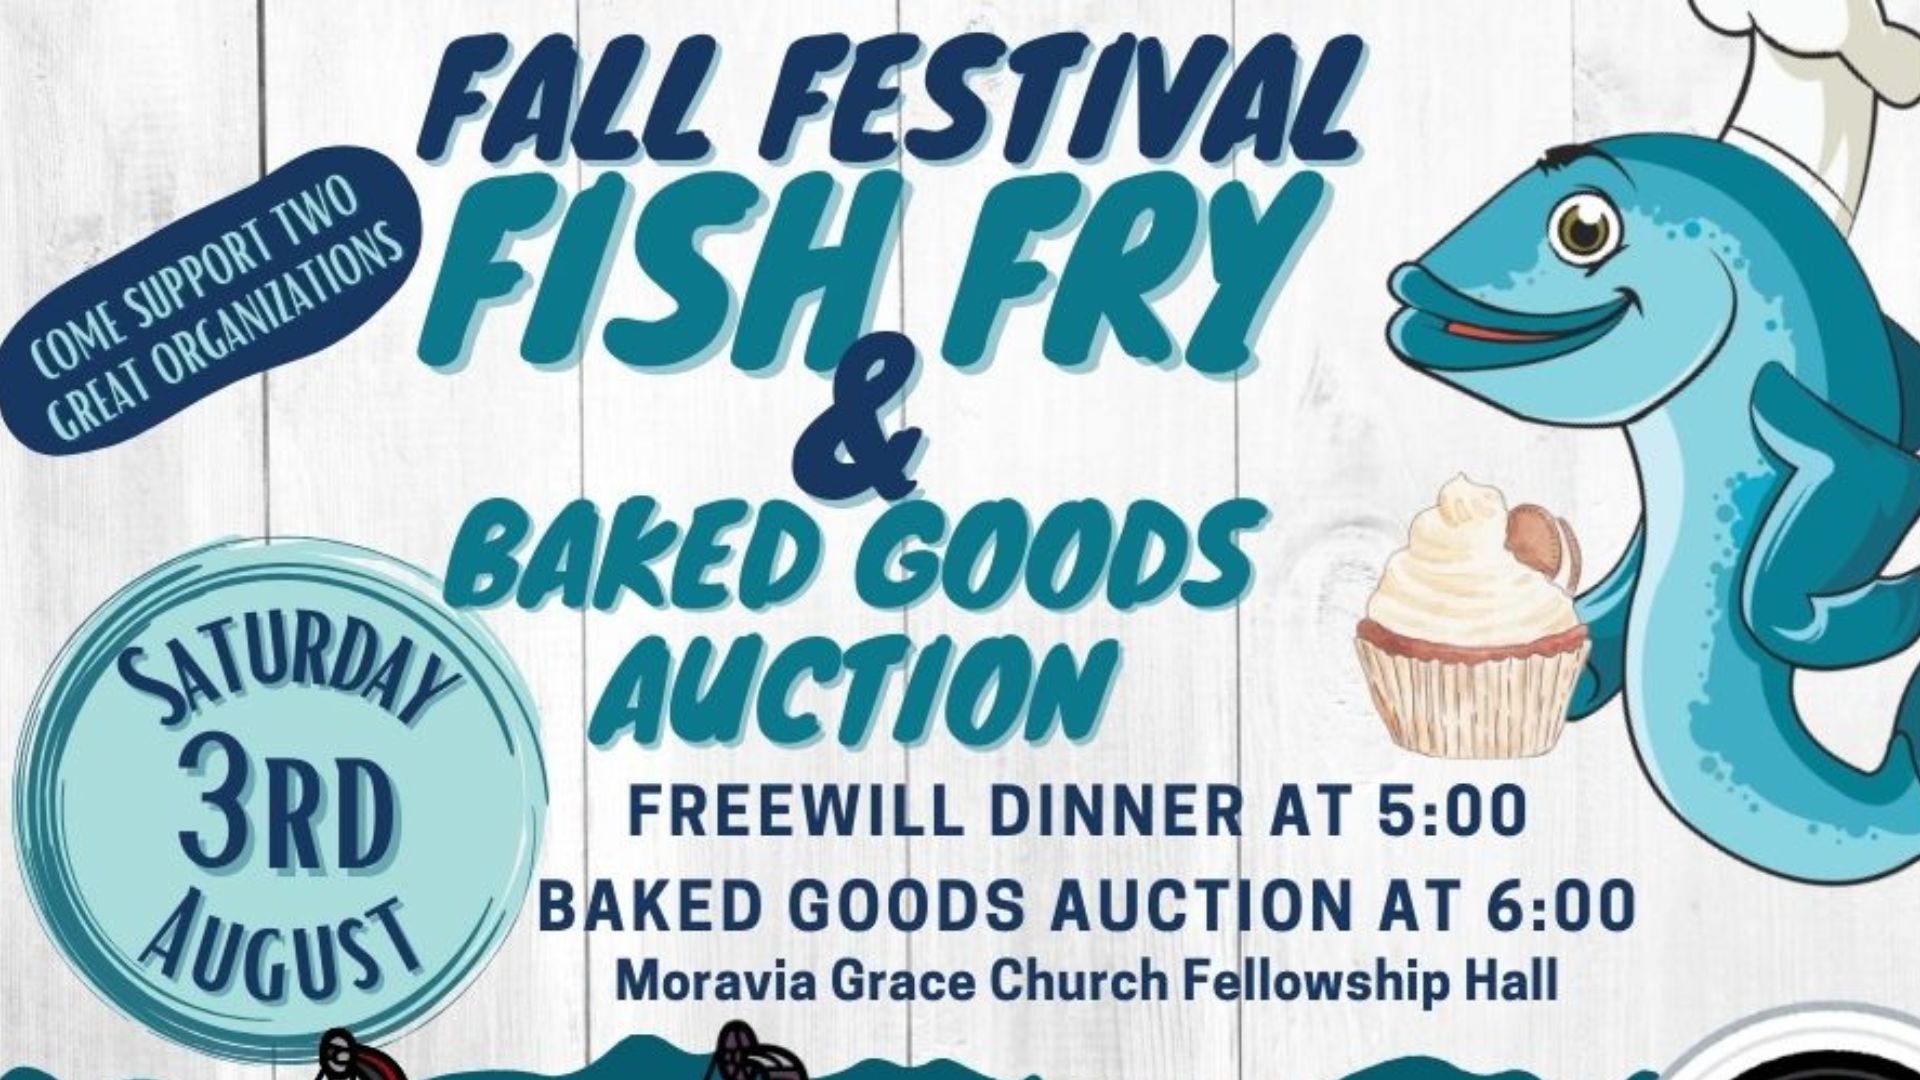 Moravia Fall Festival Fish Fry and Baked Goods Auction Saturday August 3rd